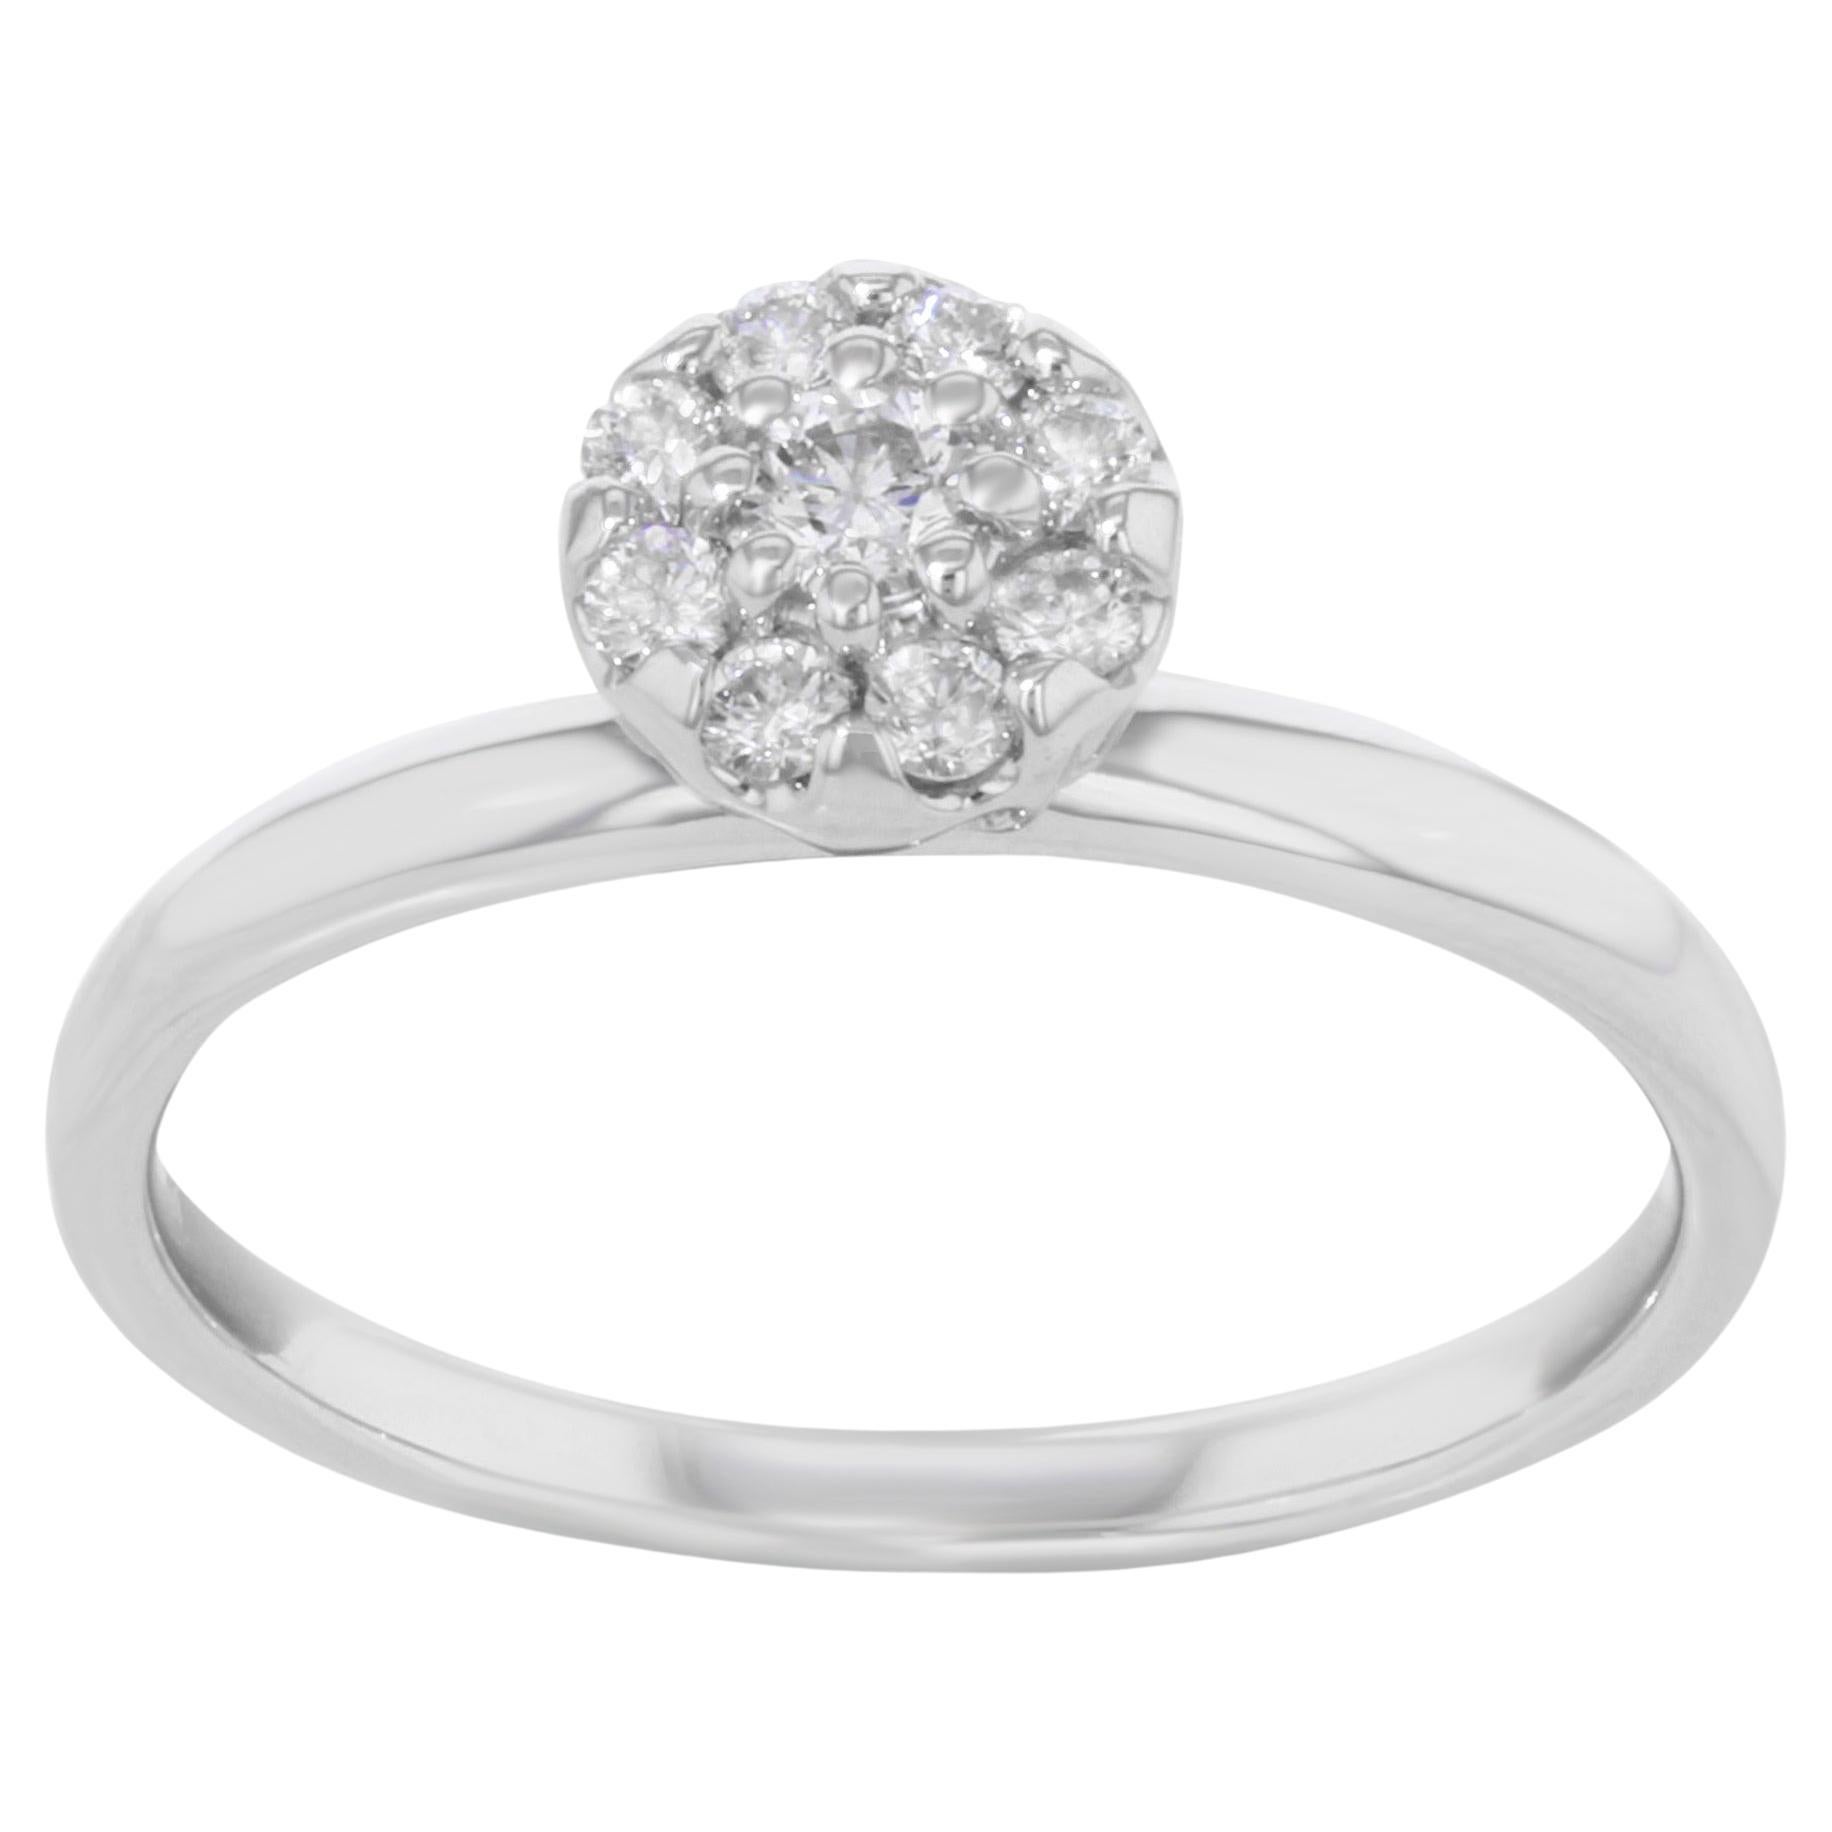 Round Cut Diamonds Womens Engagement Ring 18K White Gold 0.40 Cttw For Sale